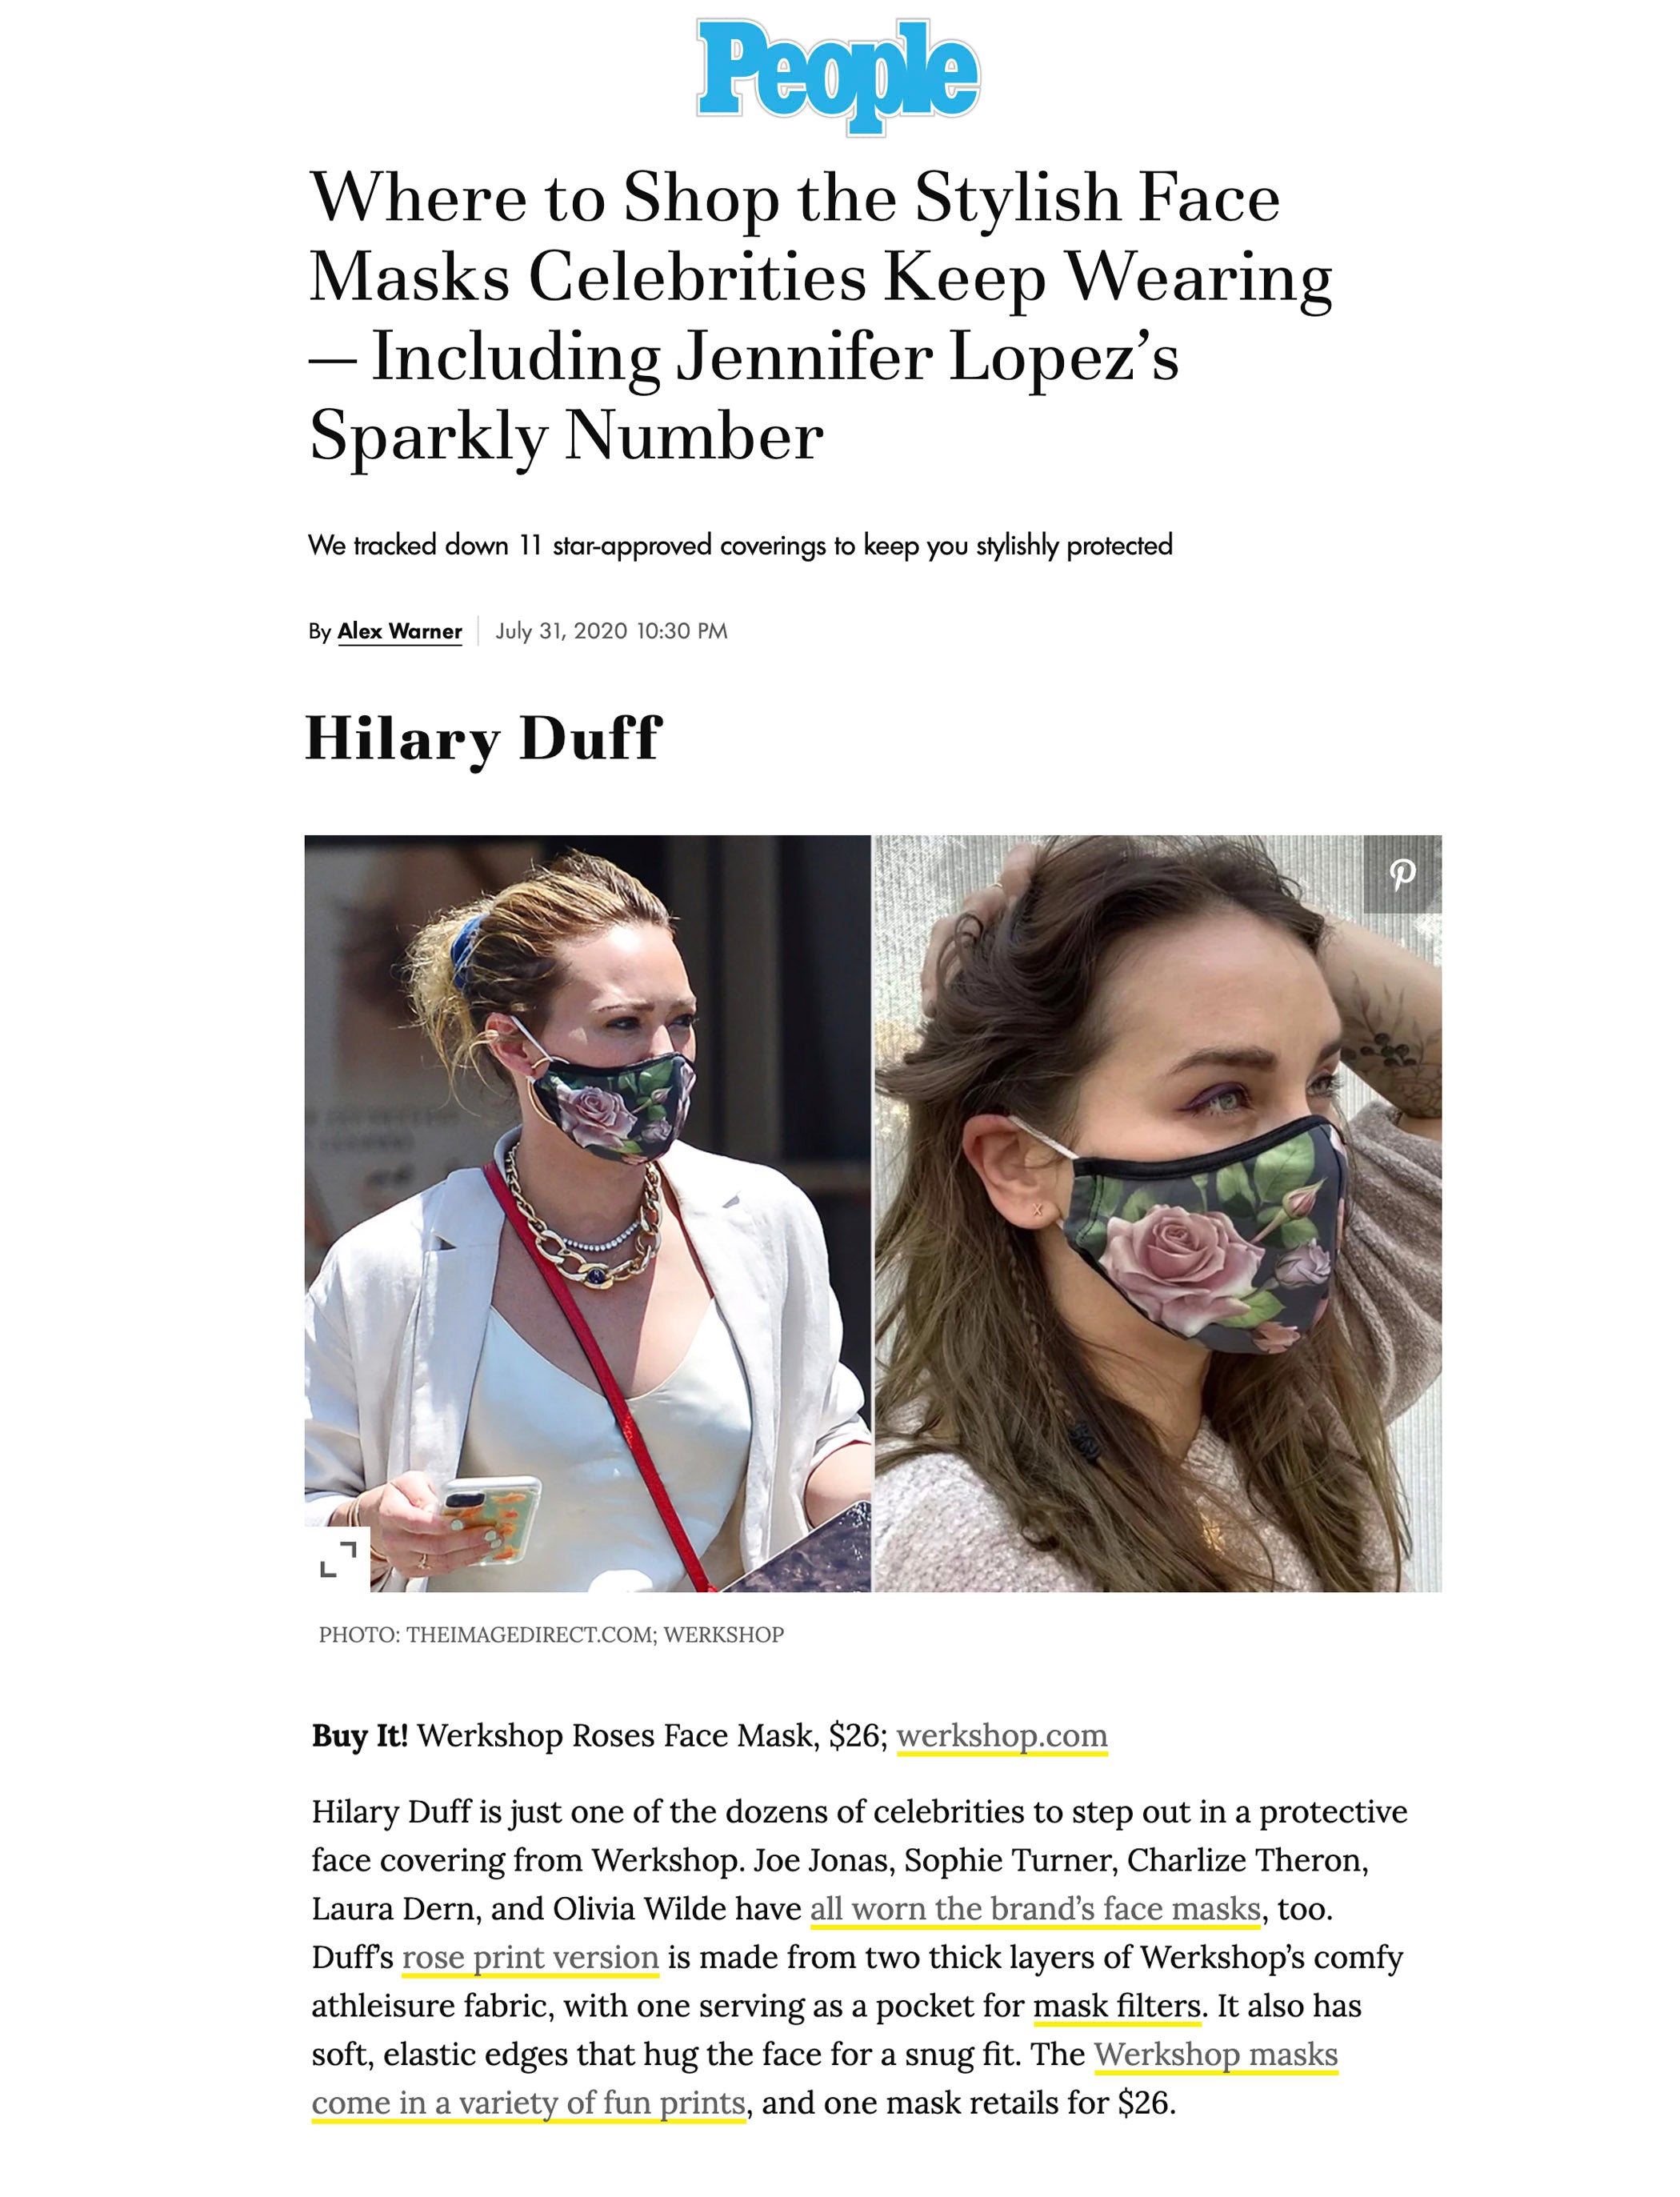 Hilary Duff wearing featured in People.com wearing WERKSHOP Roses Face Mask